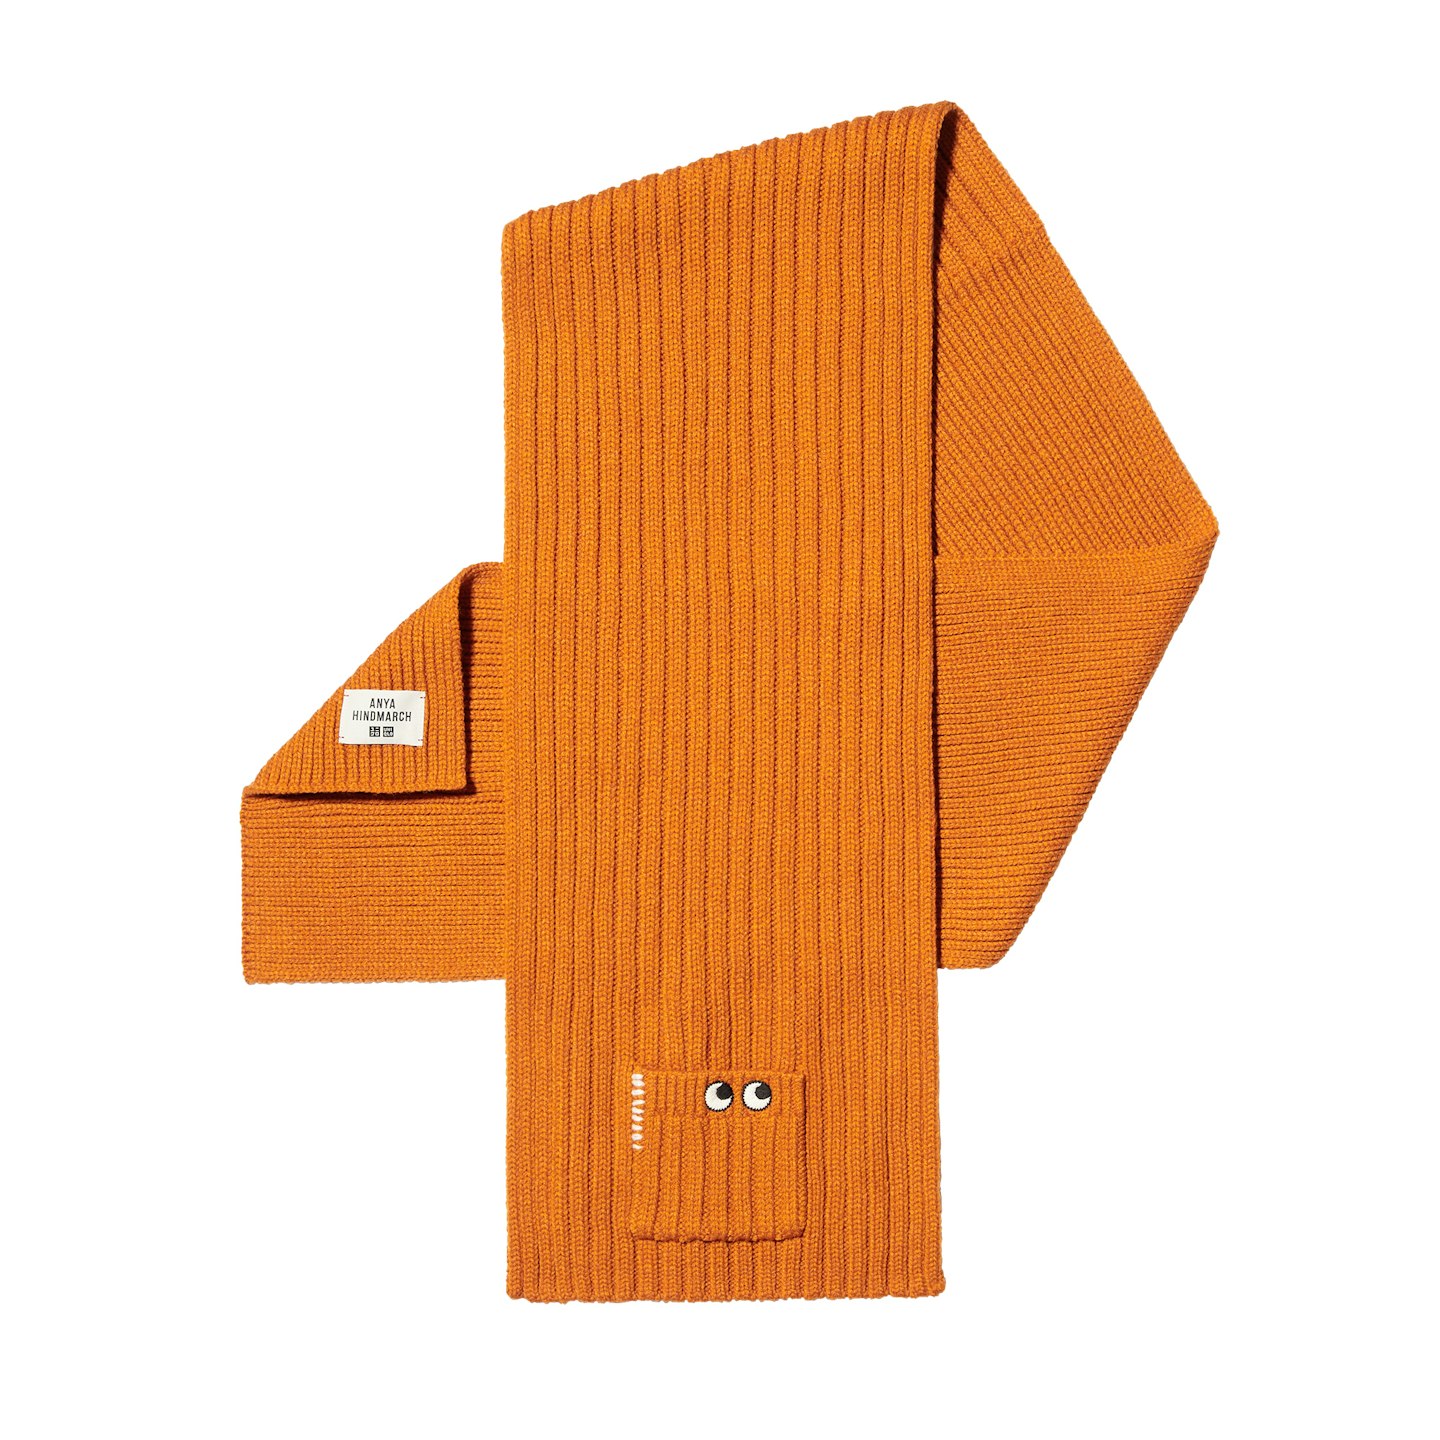 Uniqlo x Anya Hindmarch, Heattech Knitted Stole